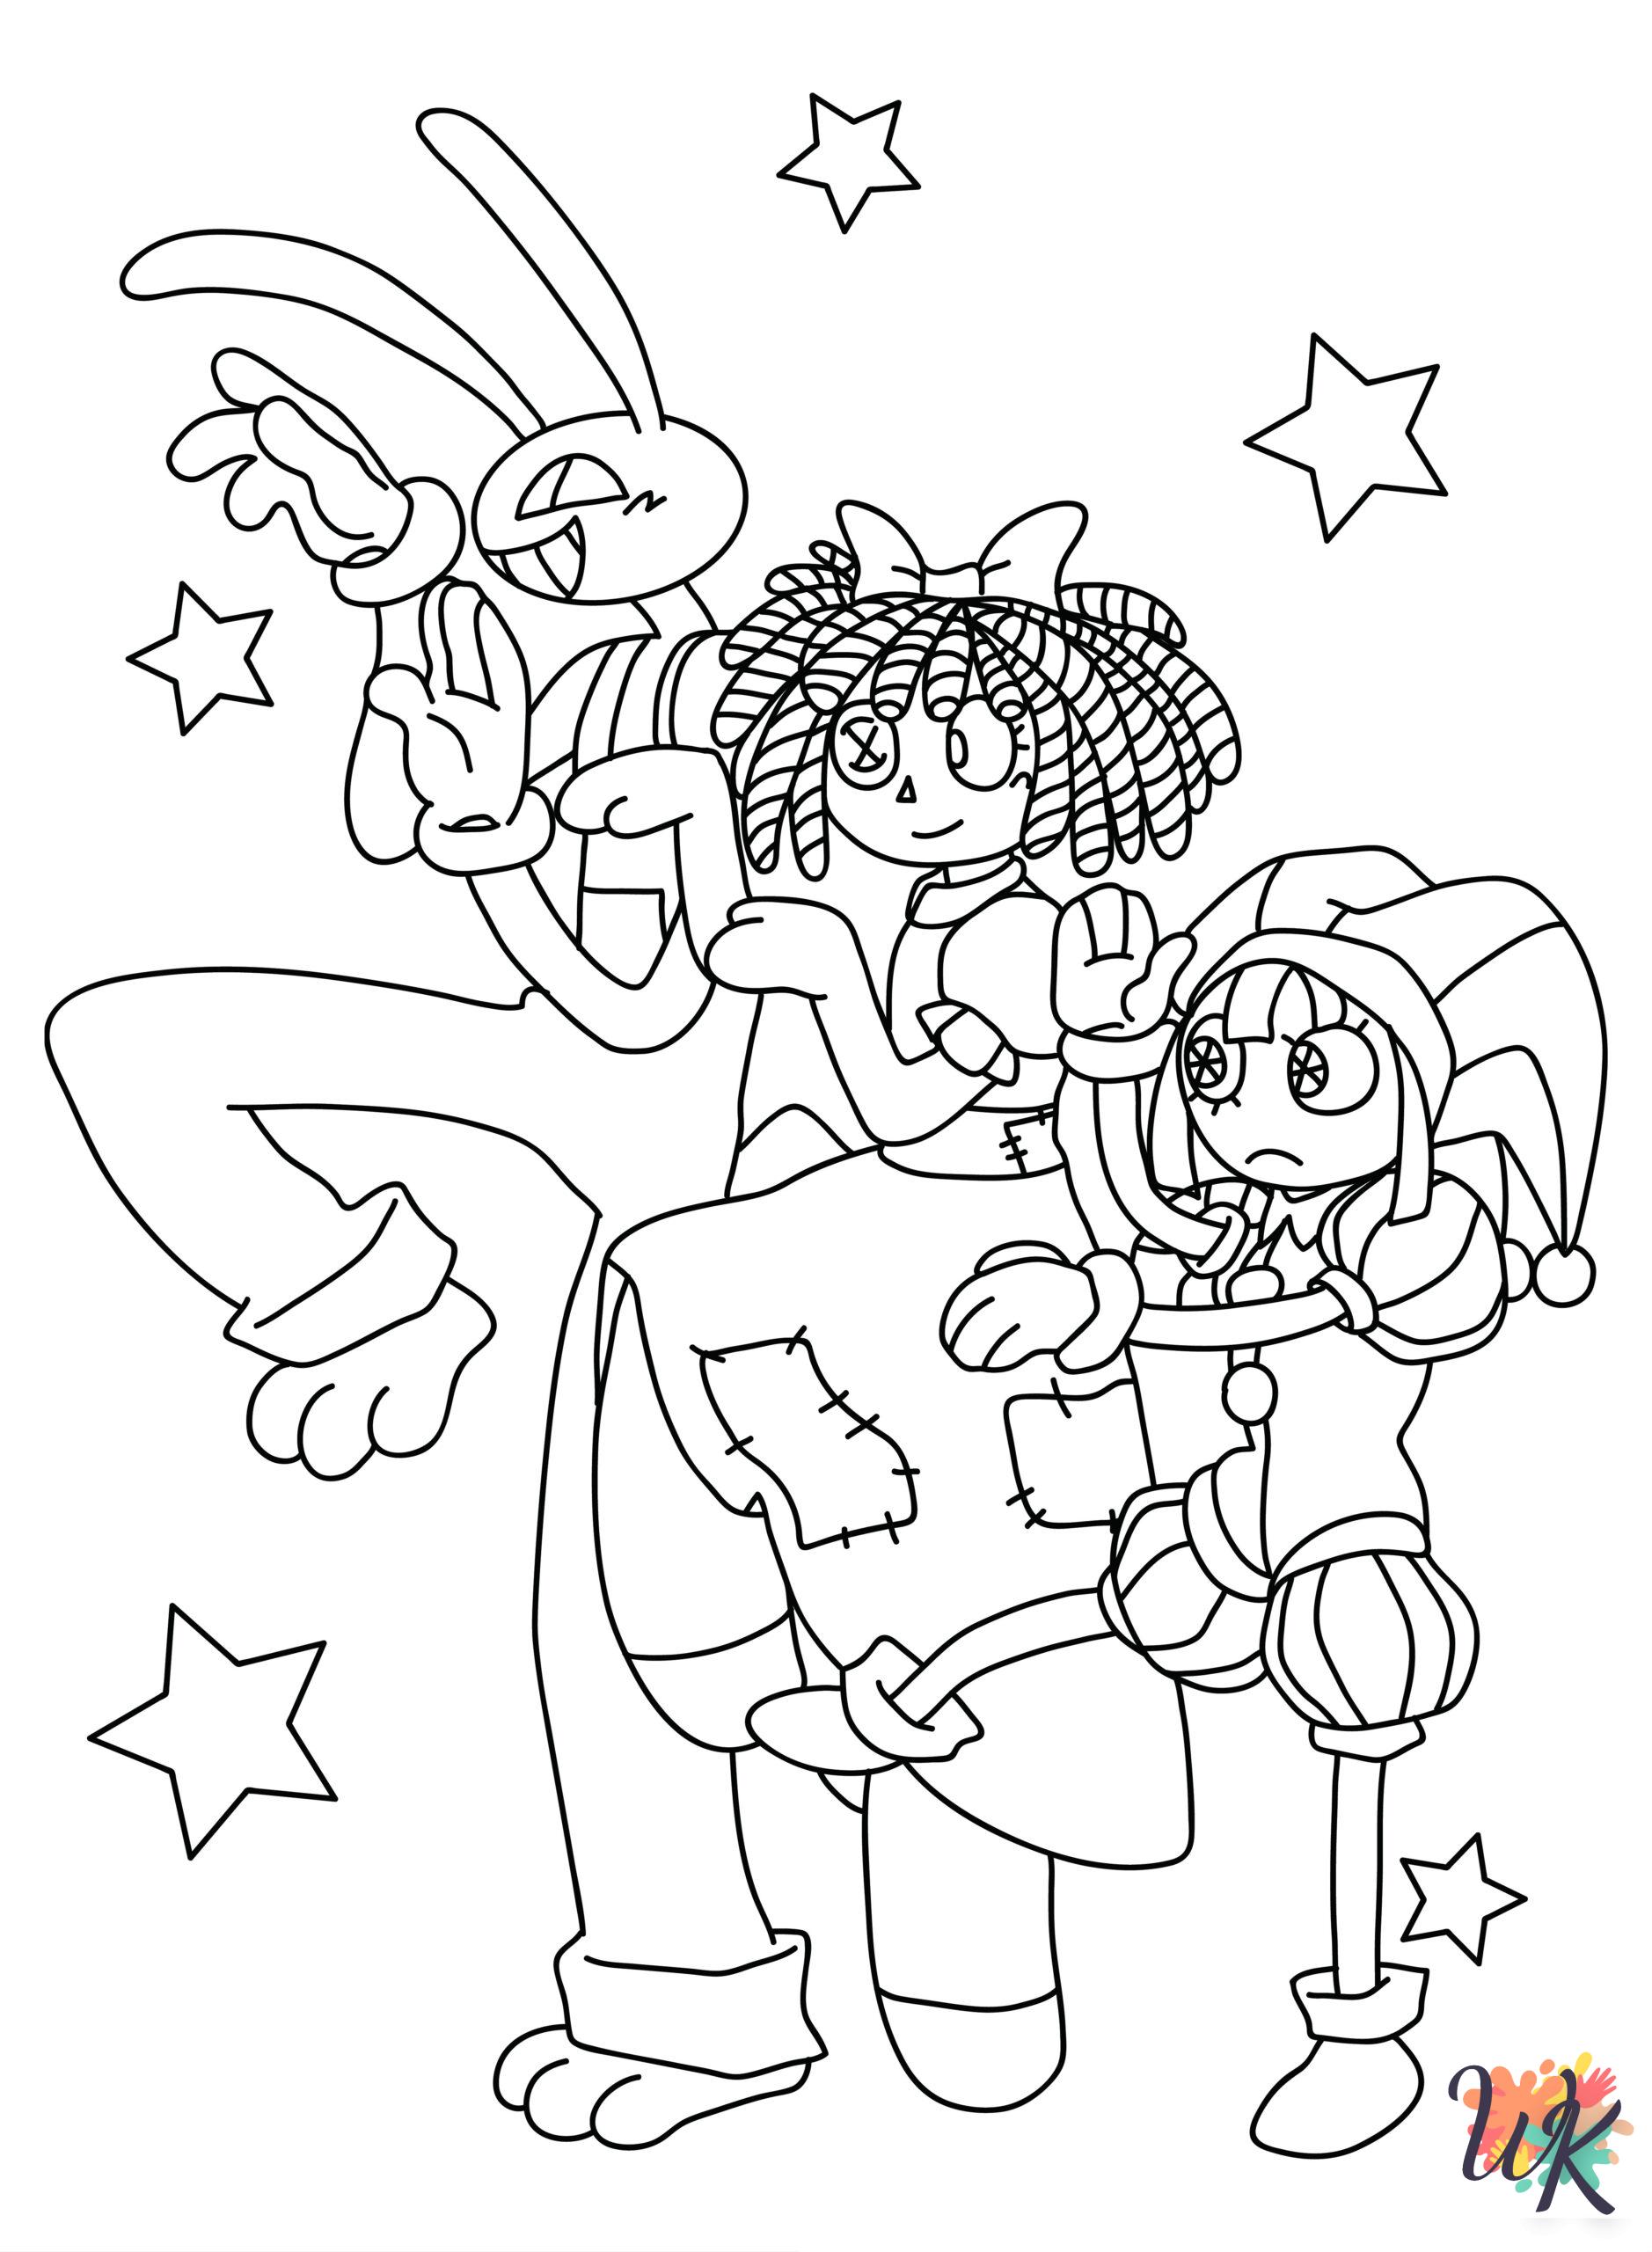 coloring pages for kids The Amazing Digital Circus 2